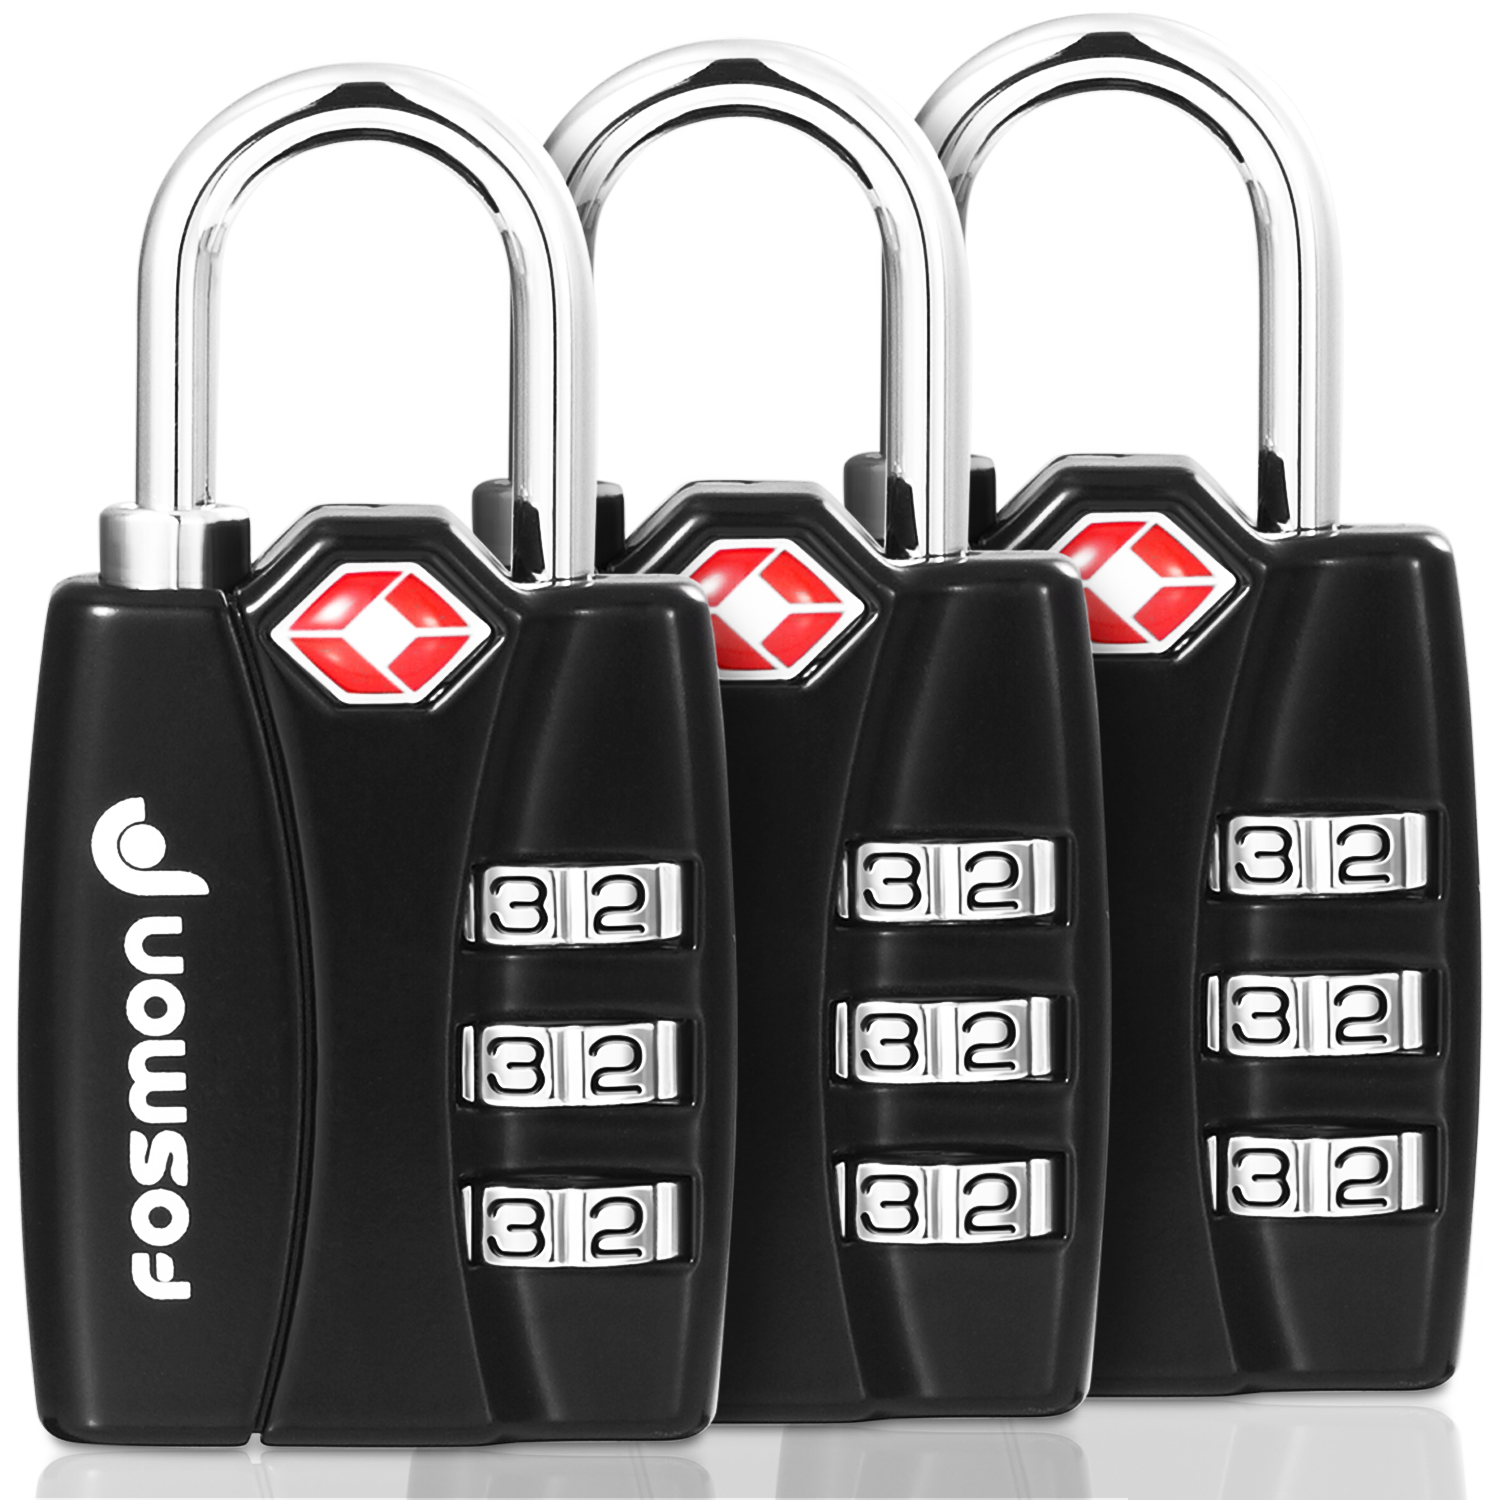 Fosmon TSA Accepted Luggage Locks, (3 Pack) Open Alert Indicator 3 Digit Combination Padlock Codes with Alloy Body for Travel Bag, Suit Case, Lockers, Gym, Bike Locks or Other - image 1 of 8